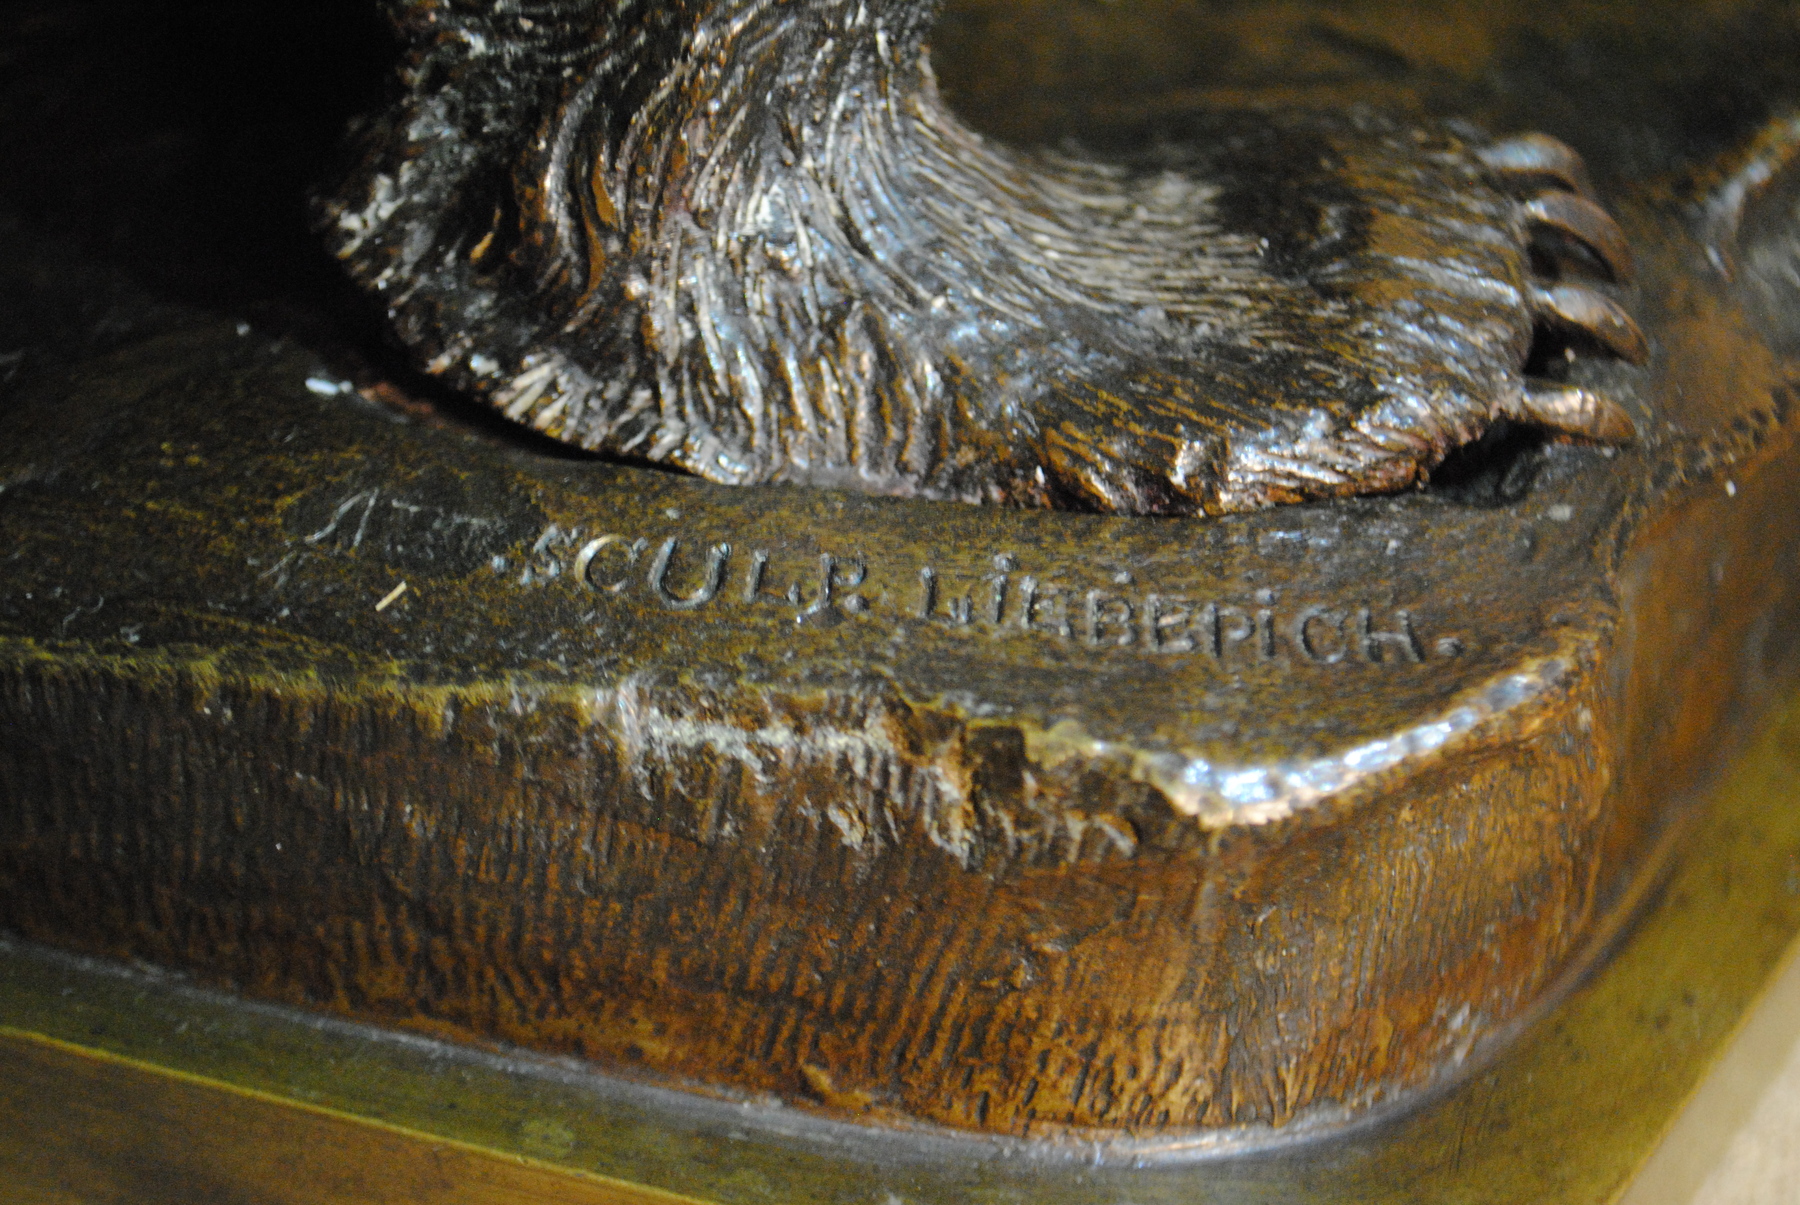 AFTER A MODEL BY NIKOLAI LIEBERICH, INSCRIBED WITH A SIGNATURE, C.F. WOERFFEL FOUNDRY, ST PETERSBURG